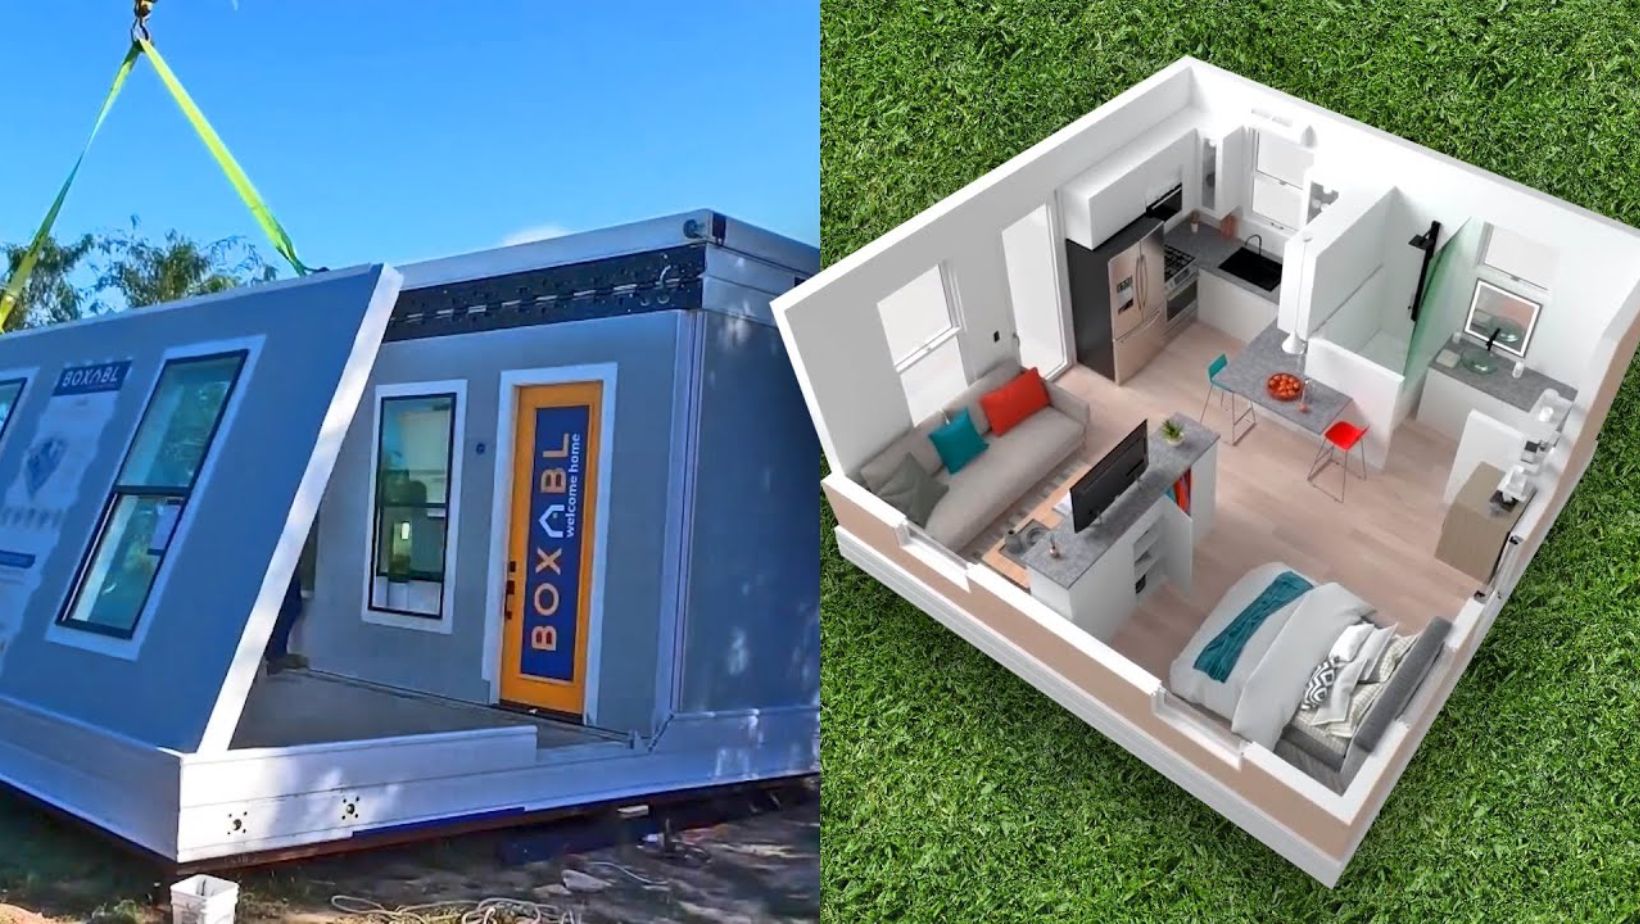 Should You Consider Buying A Foldable House?